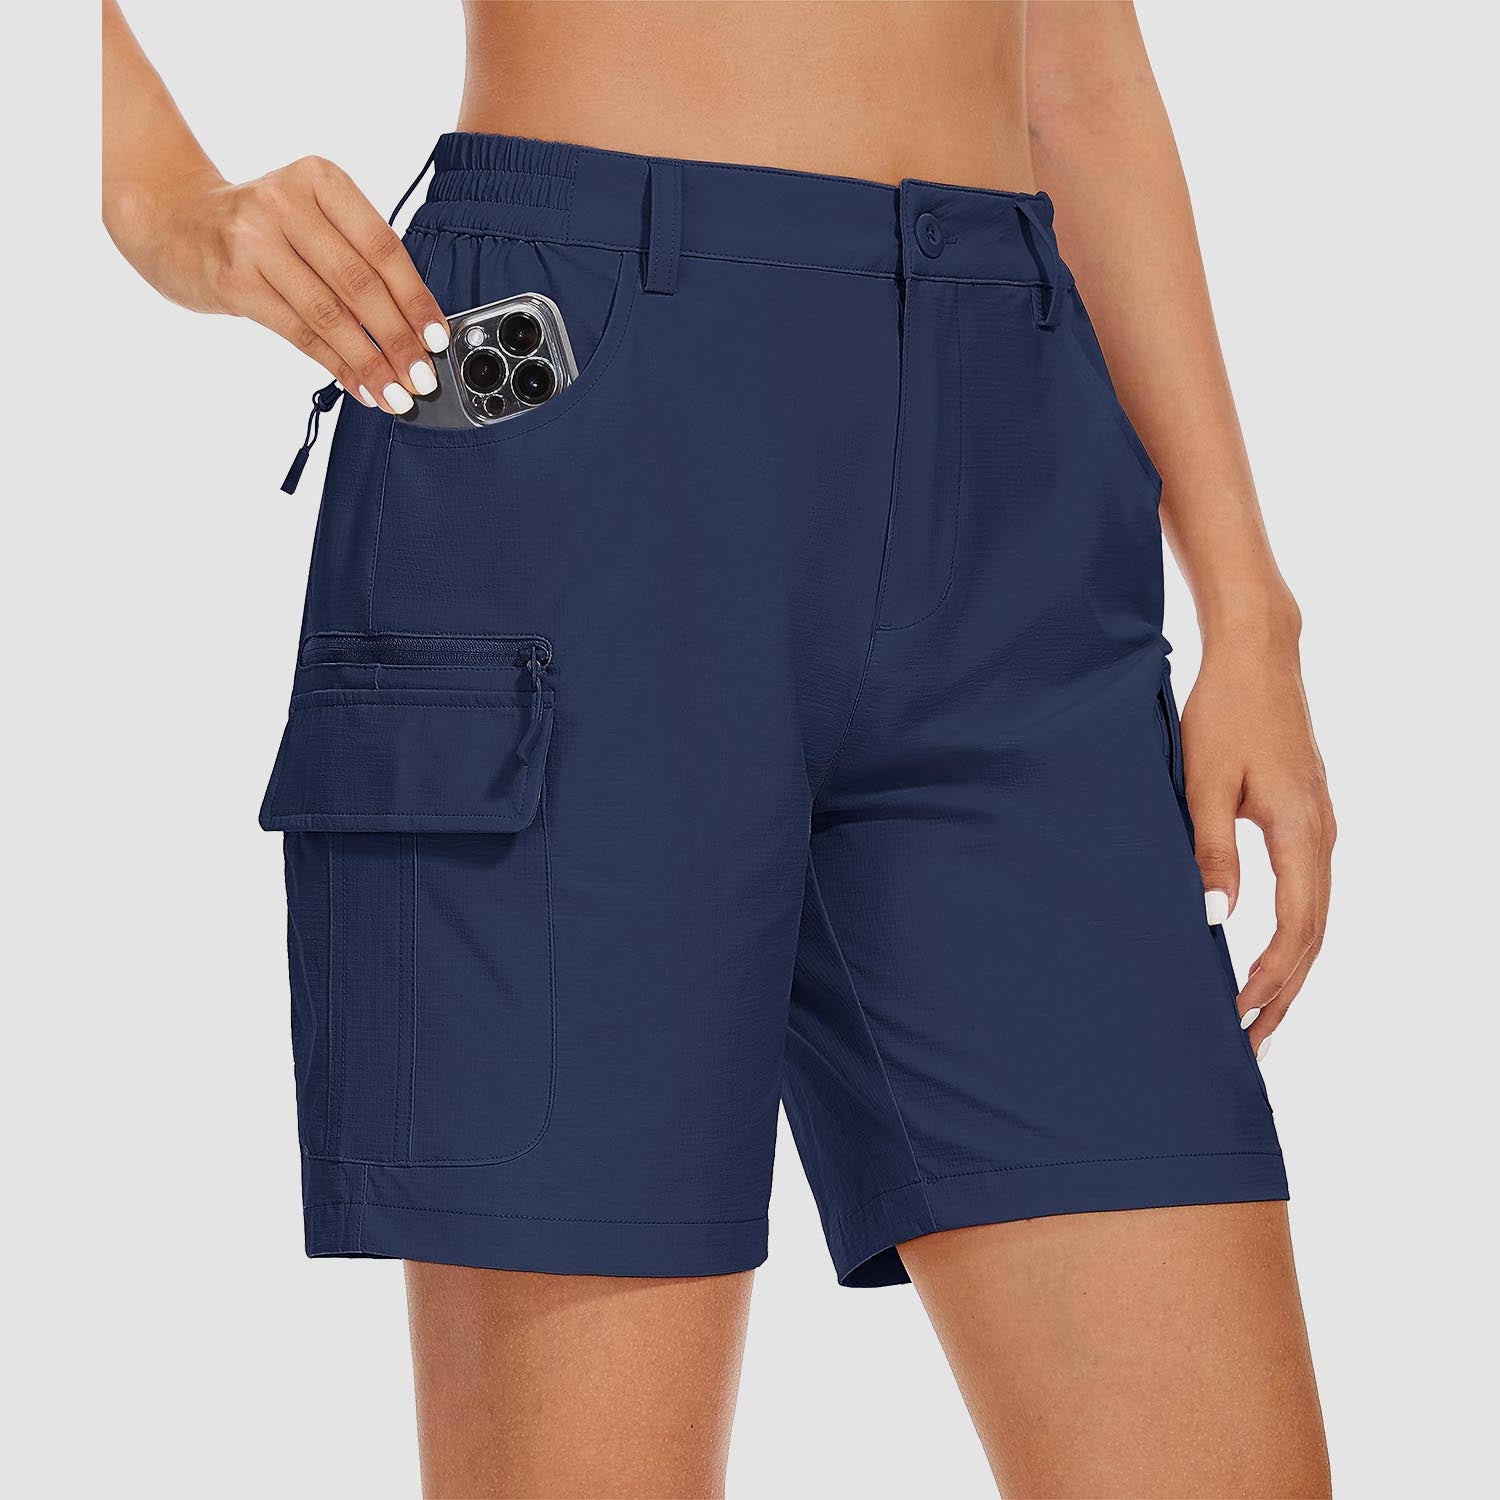 Women's   Golf Shorts 6 Pockets Quick Dry Hiking Cargo Shorts Lightweight Water Resistant Summer Outdoor Shorts